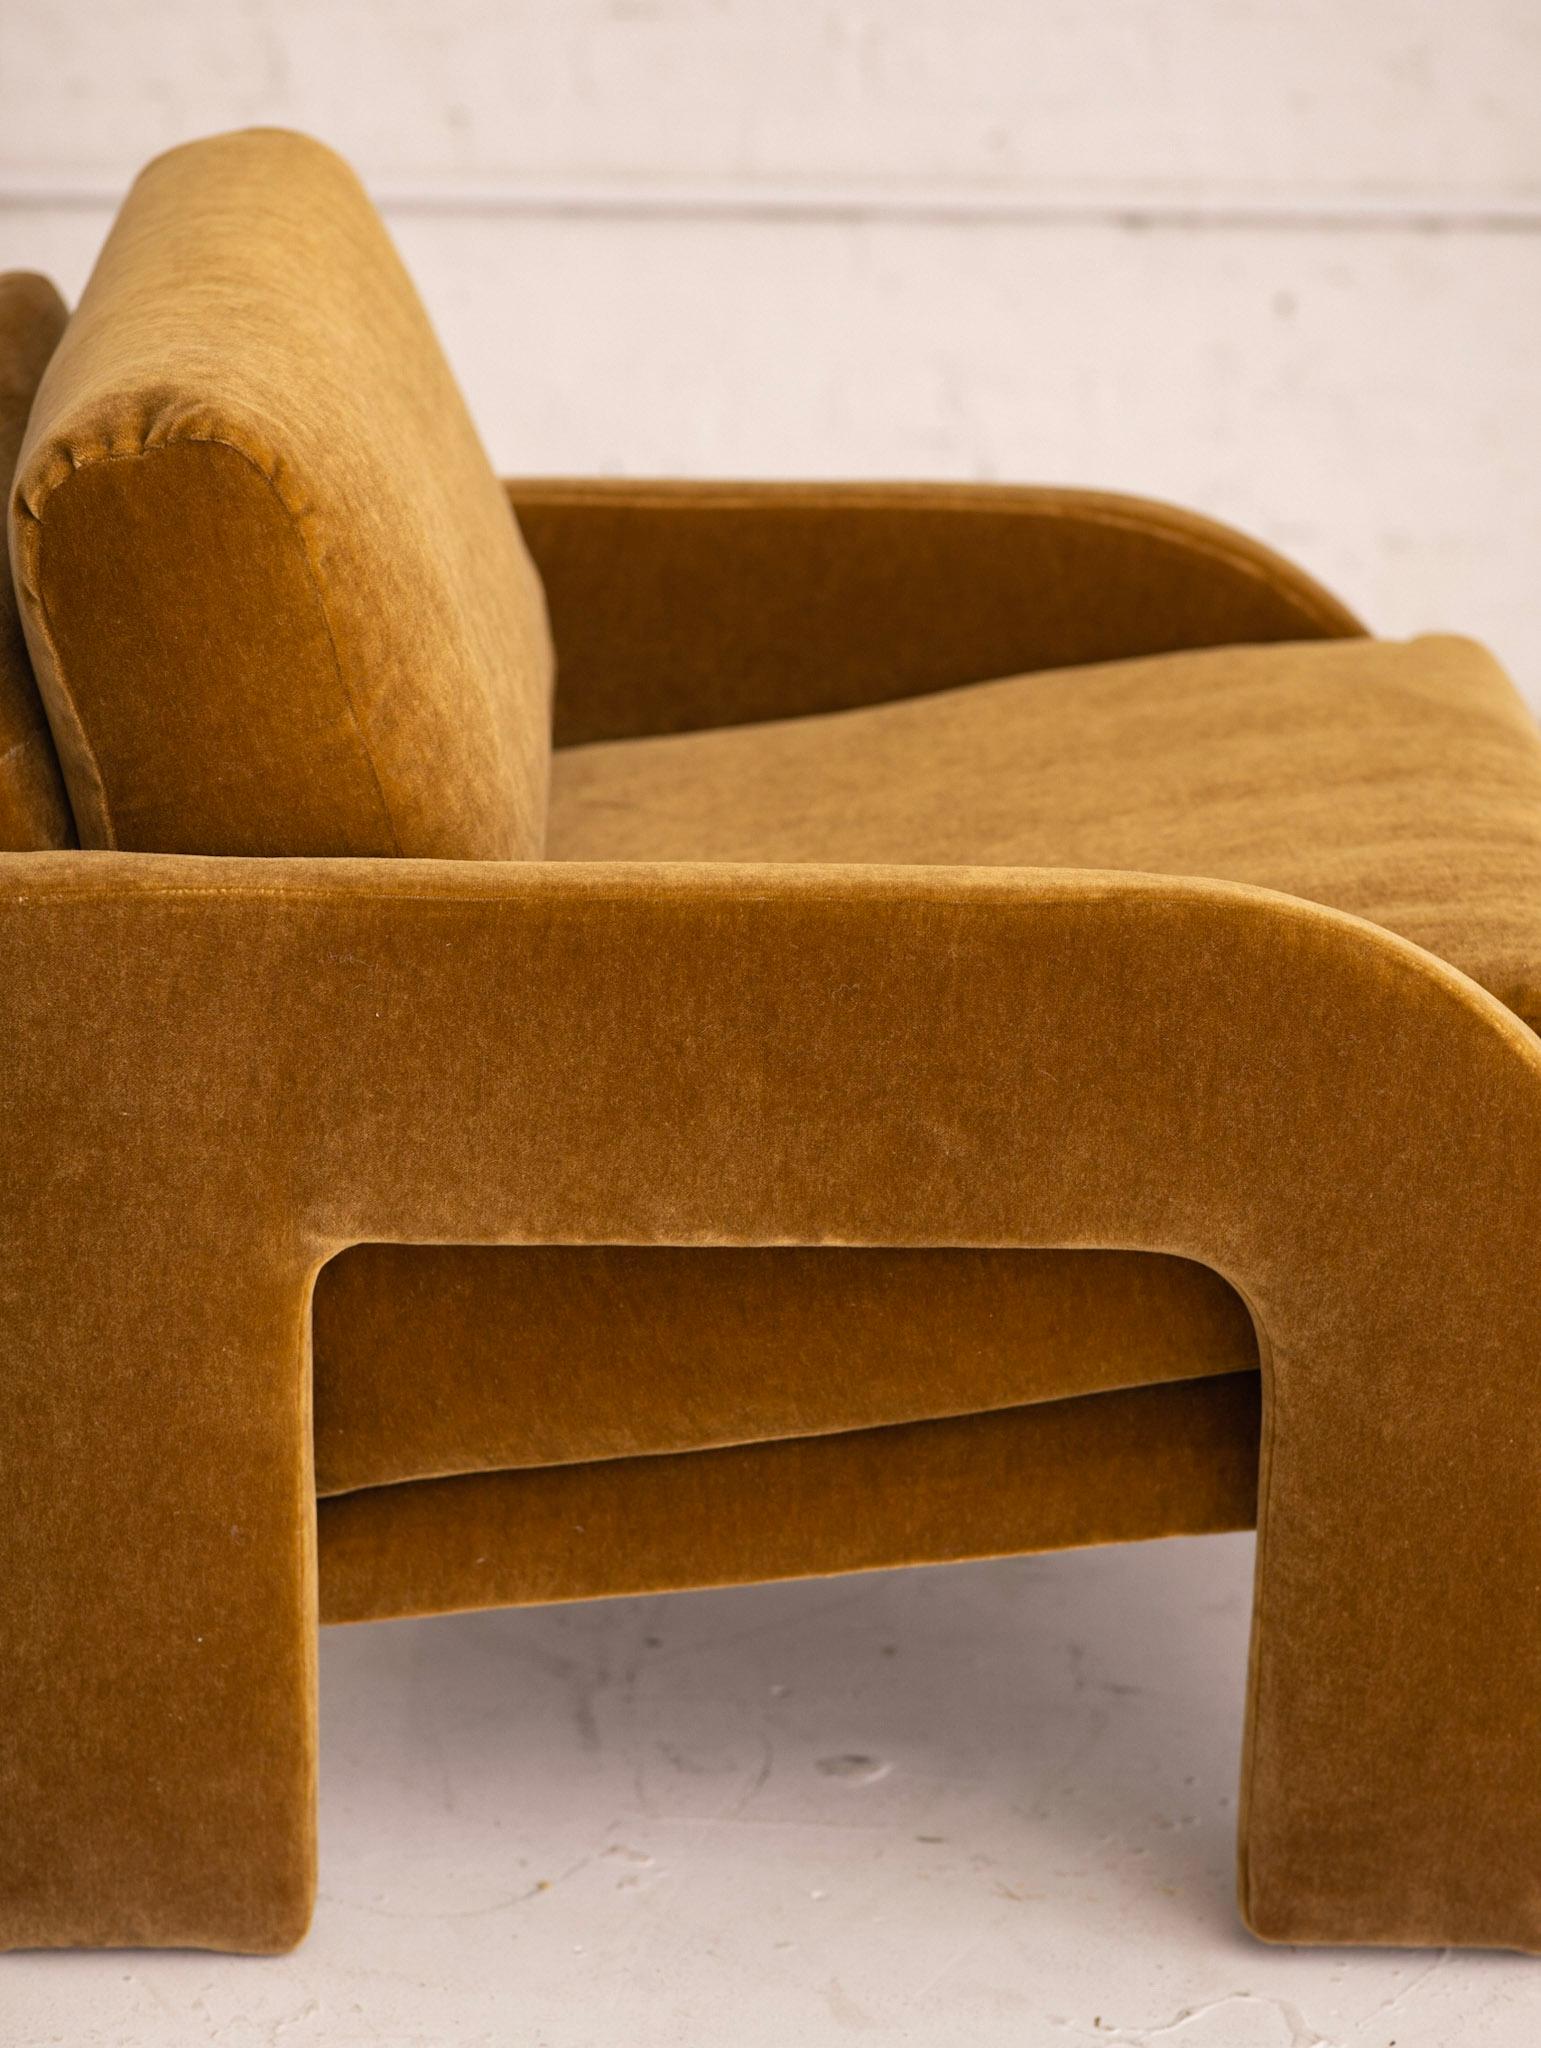 Late 20th Century 1980s Postmodern Architectural Armchair in Camel Mohair